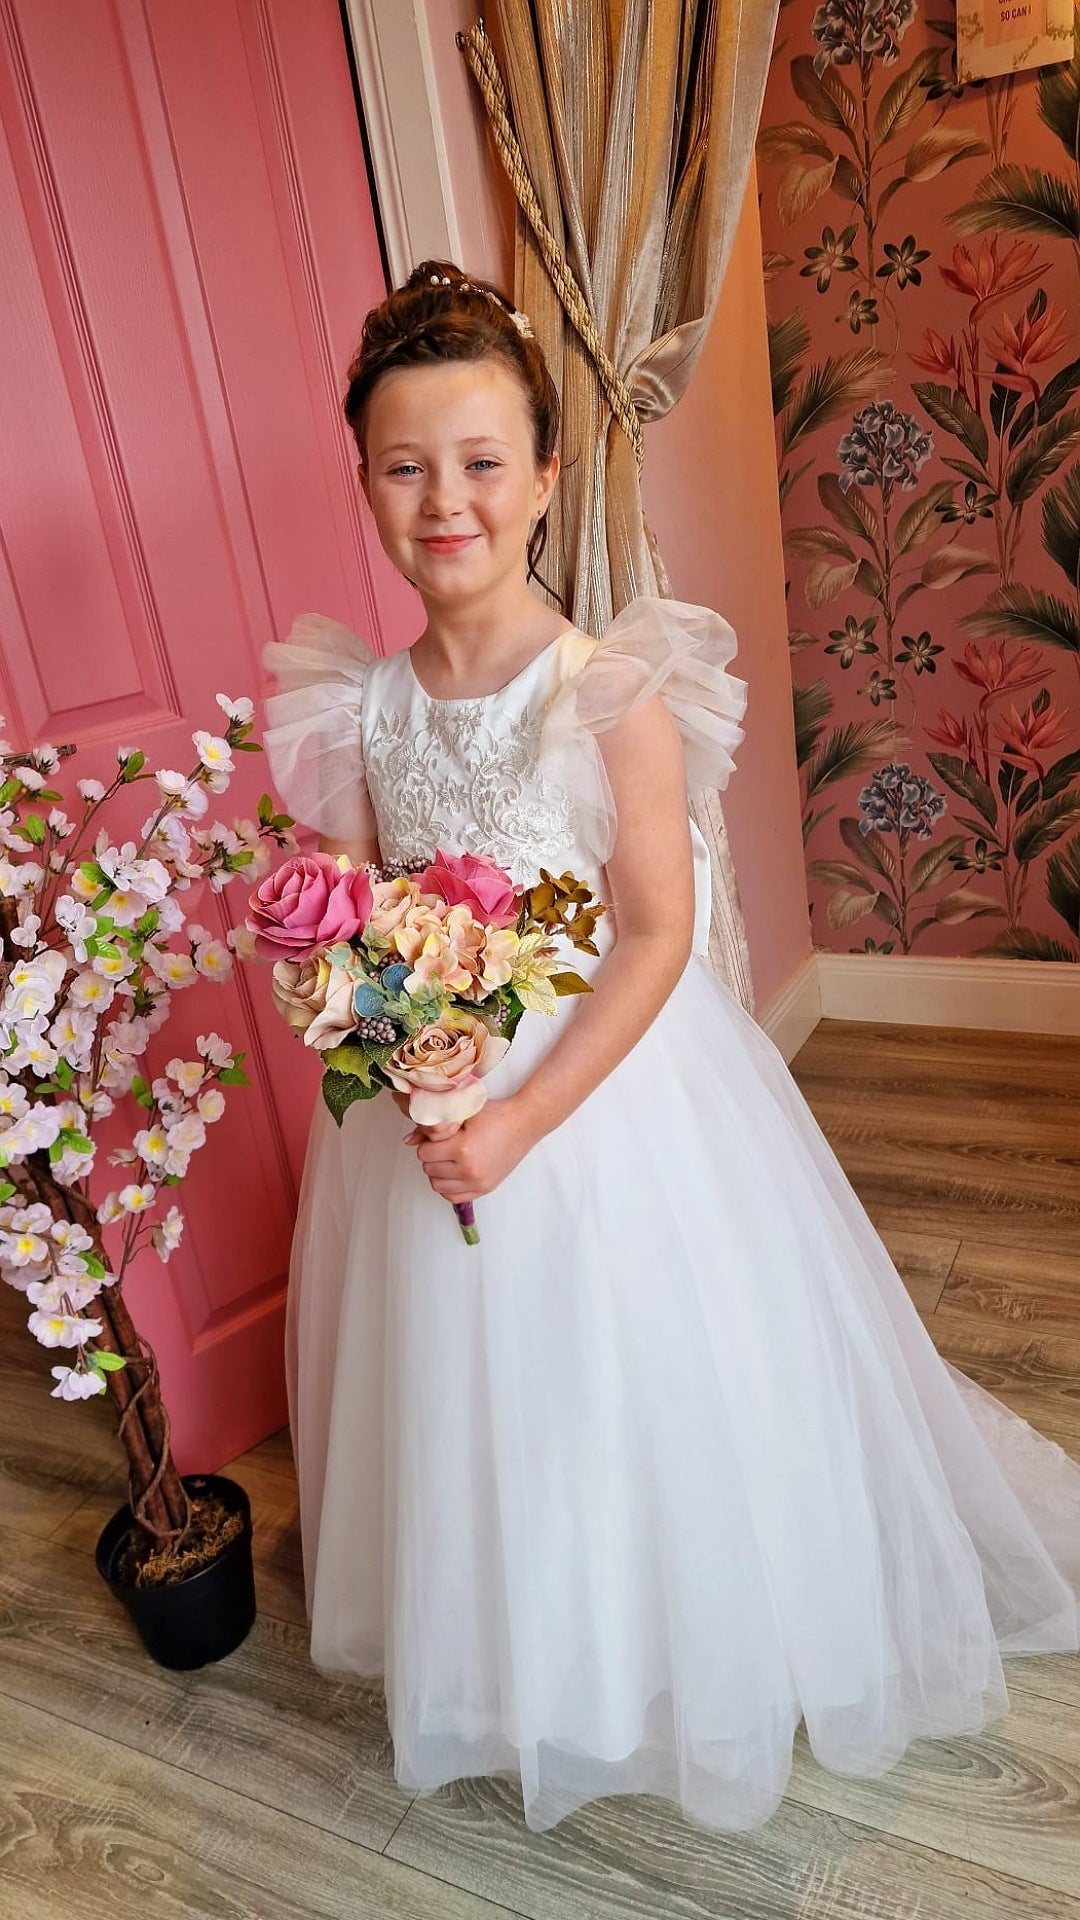 Emilia Flower Girl Dress With Bow At Back